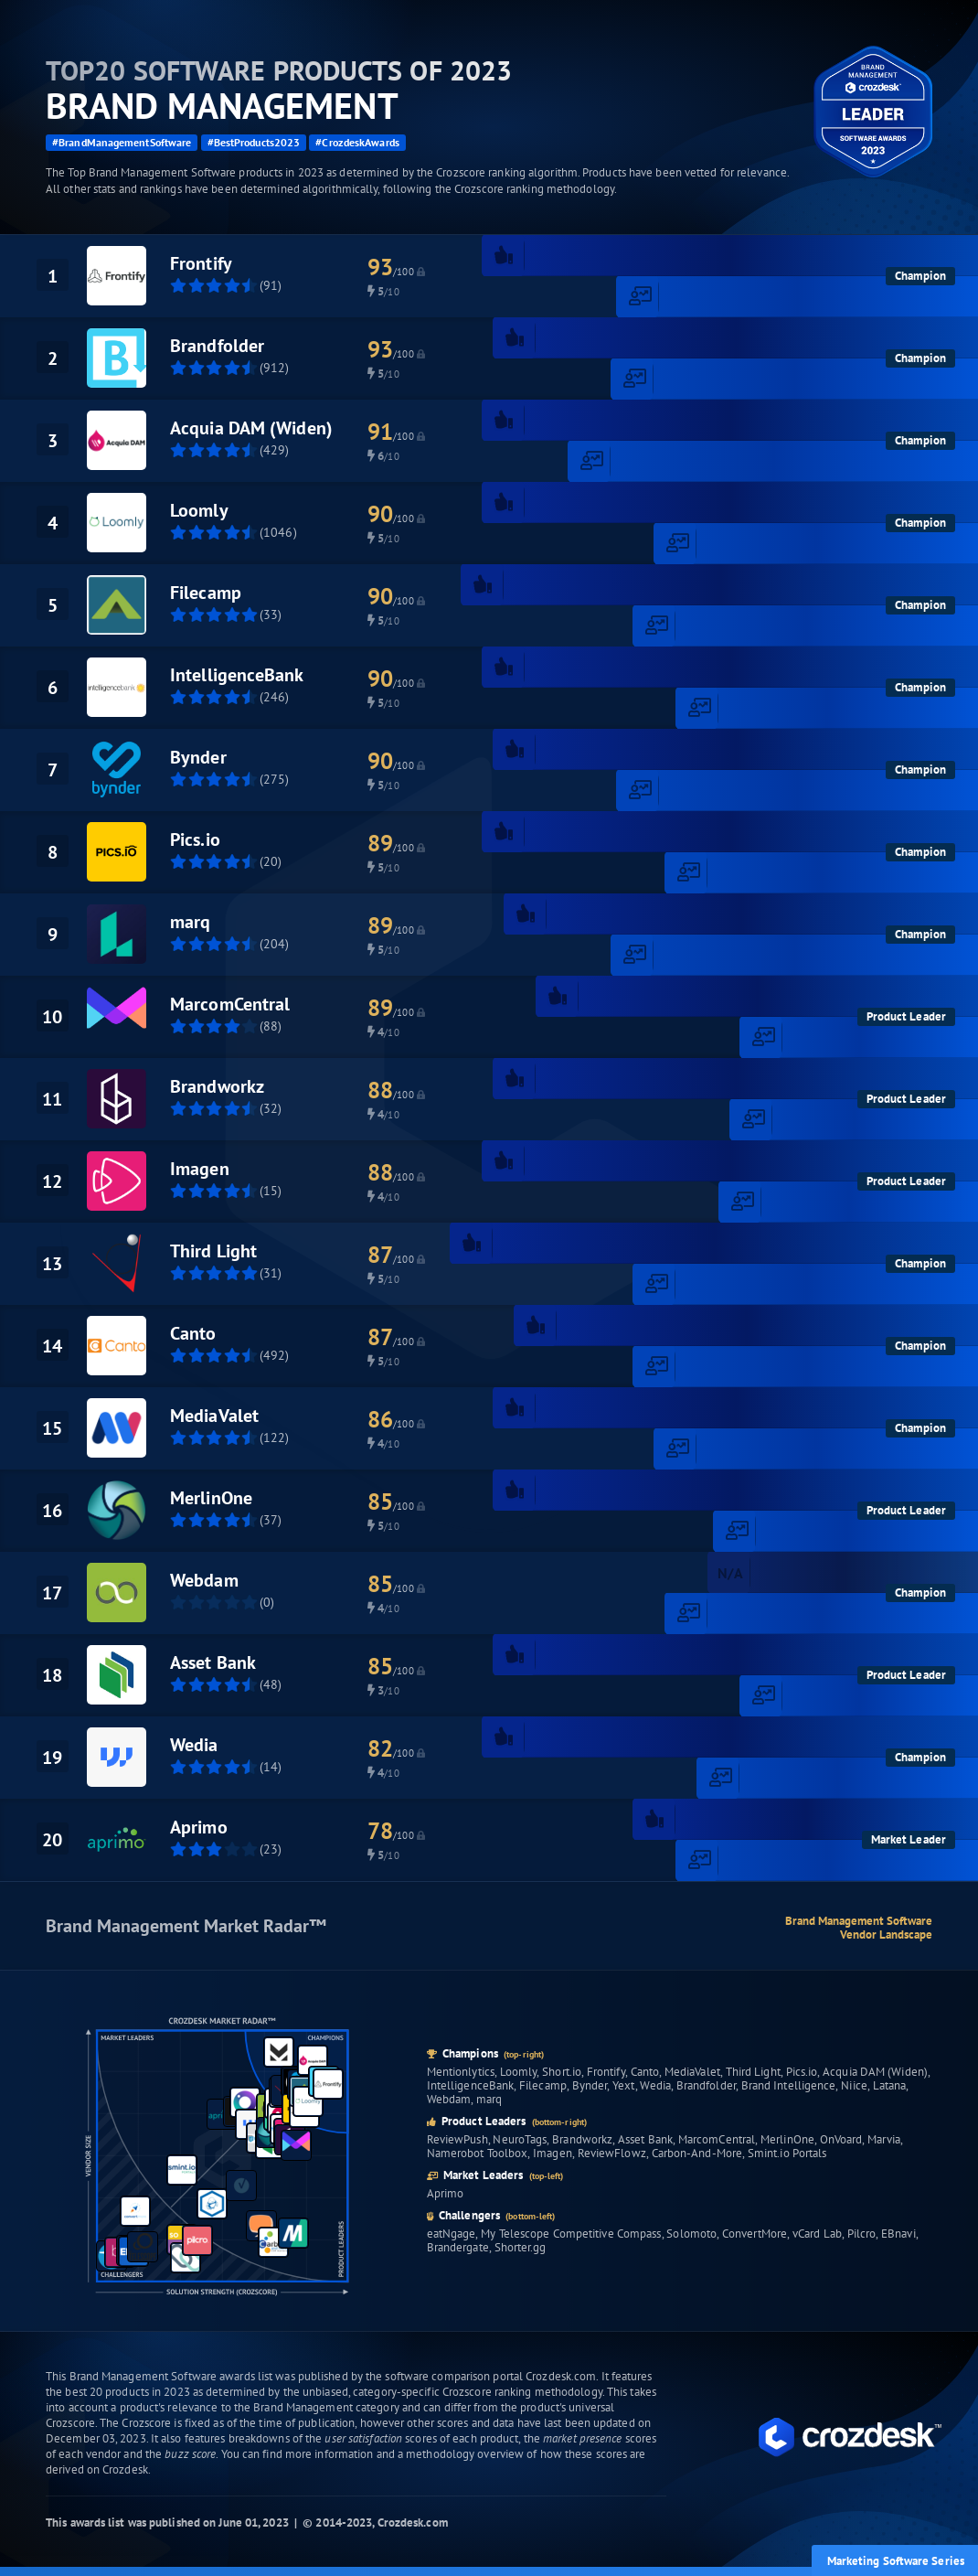 Top 20 Brand Management Software of 2023 Infographic